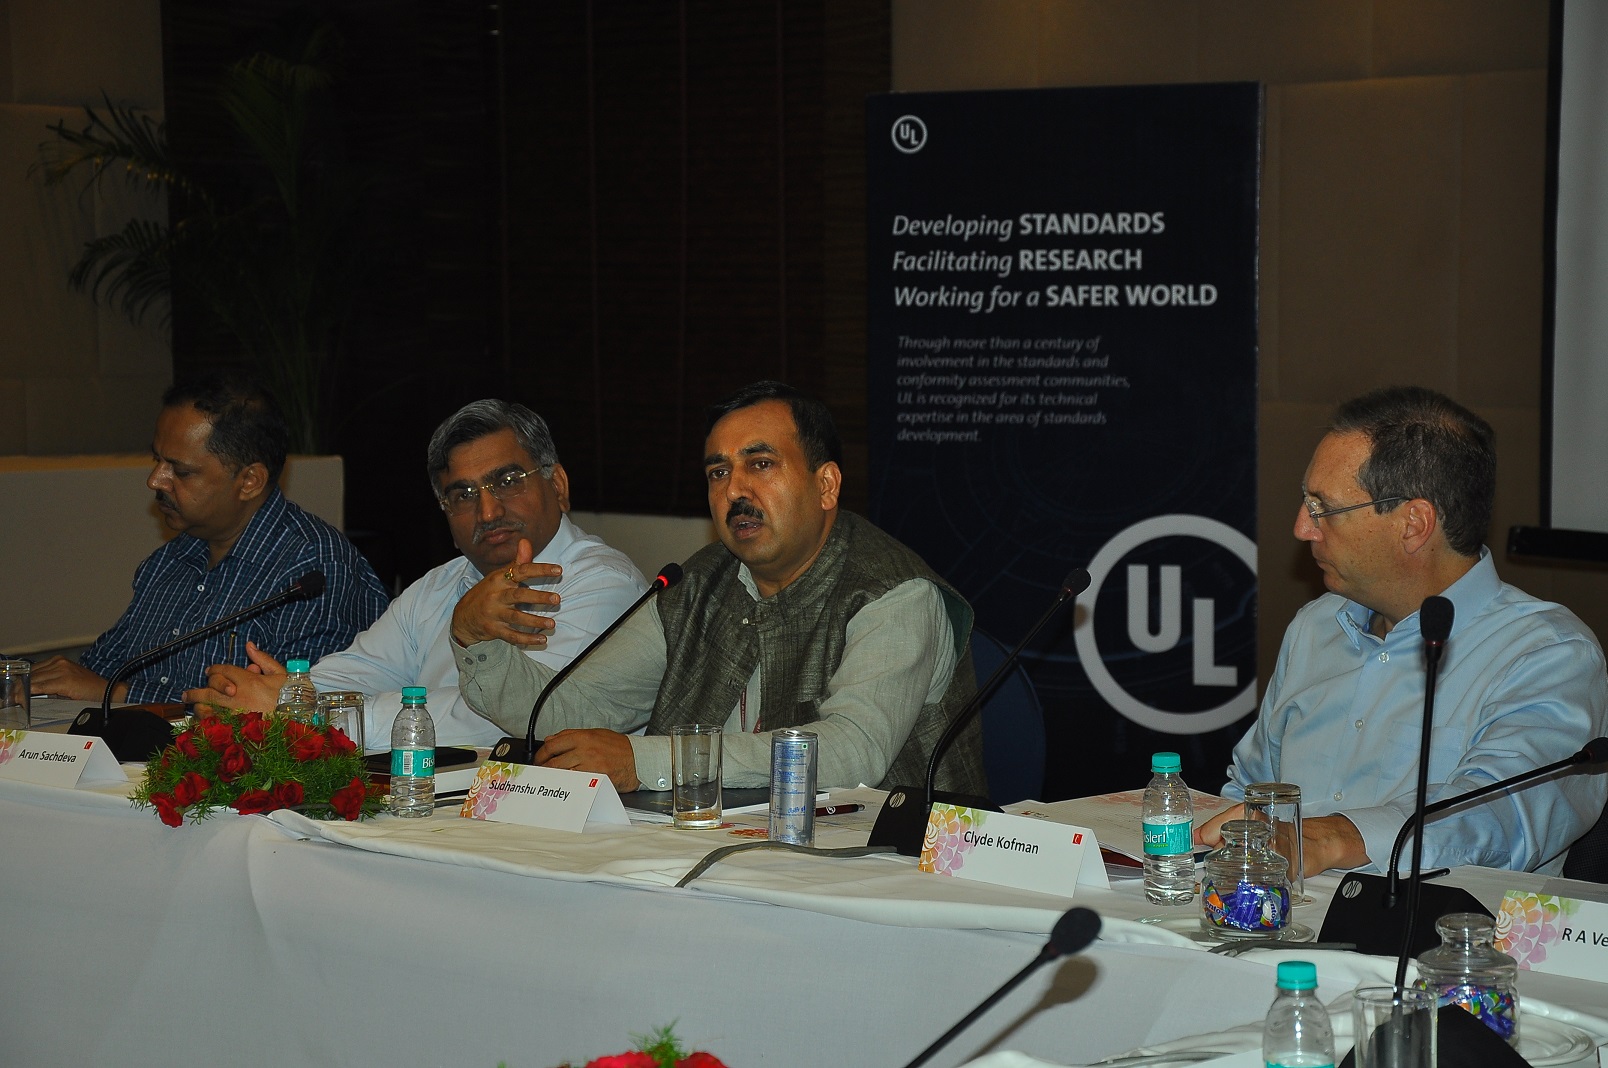 UL Standards with stakeholders in India